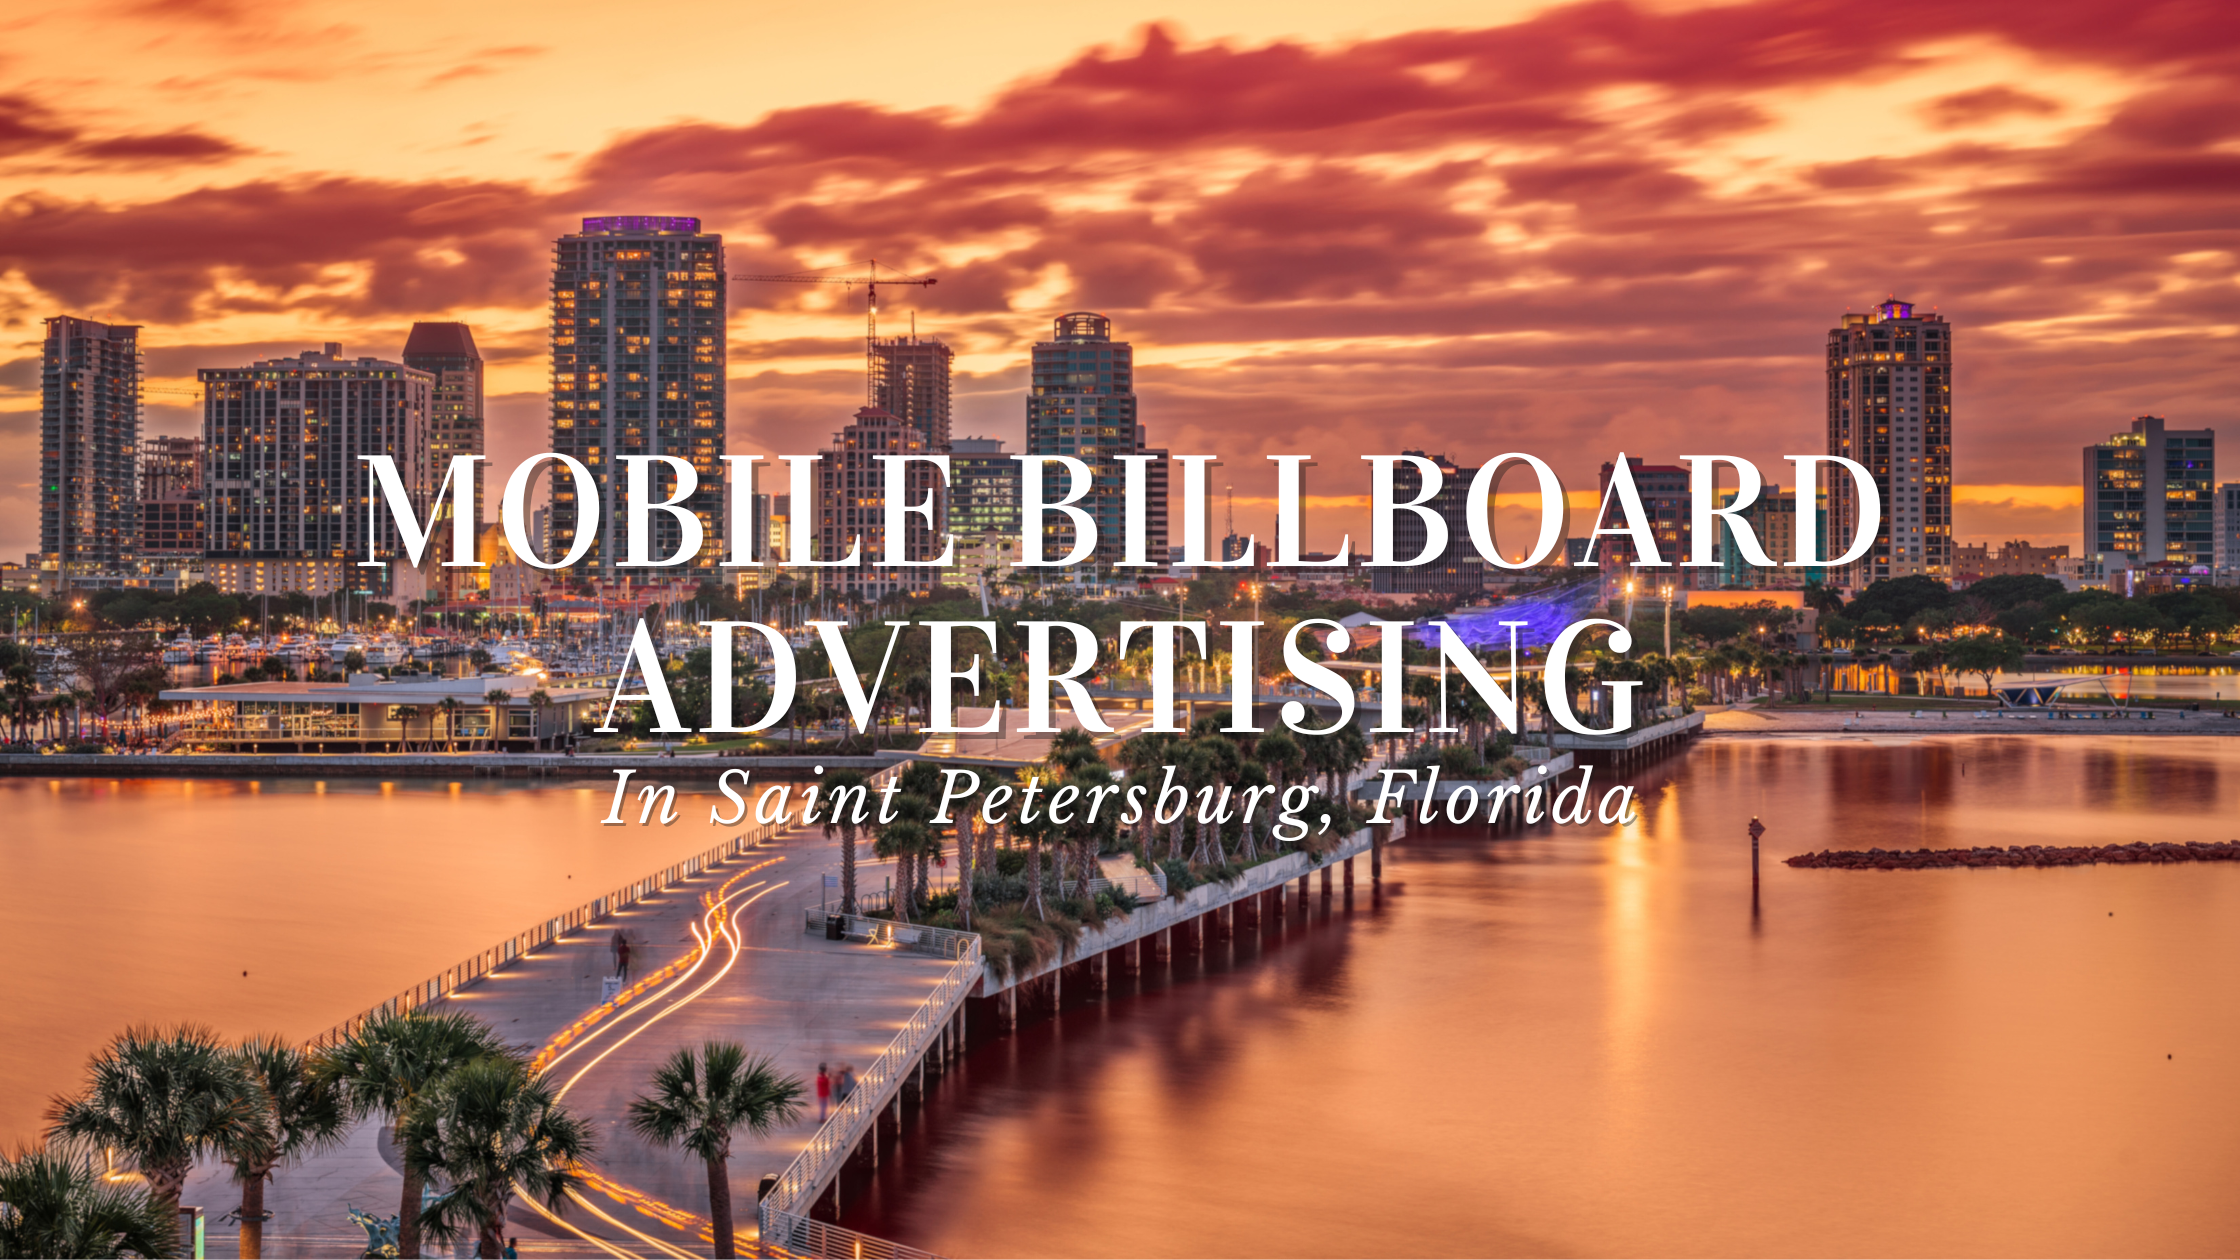 Sunset over St. Petersburg, Florida, with the city skyline and waterfront promenade highlighted. Text overlay reads 'MOBILE BILLBOARD ADVERTISING in Saint Petersburg, Florida' representing Marathon Billboards.